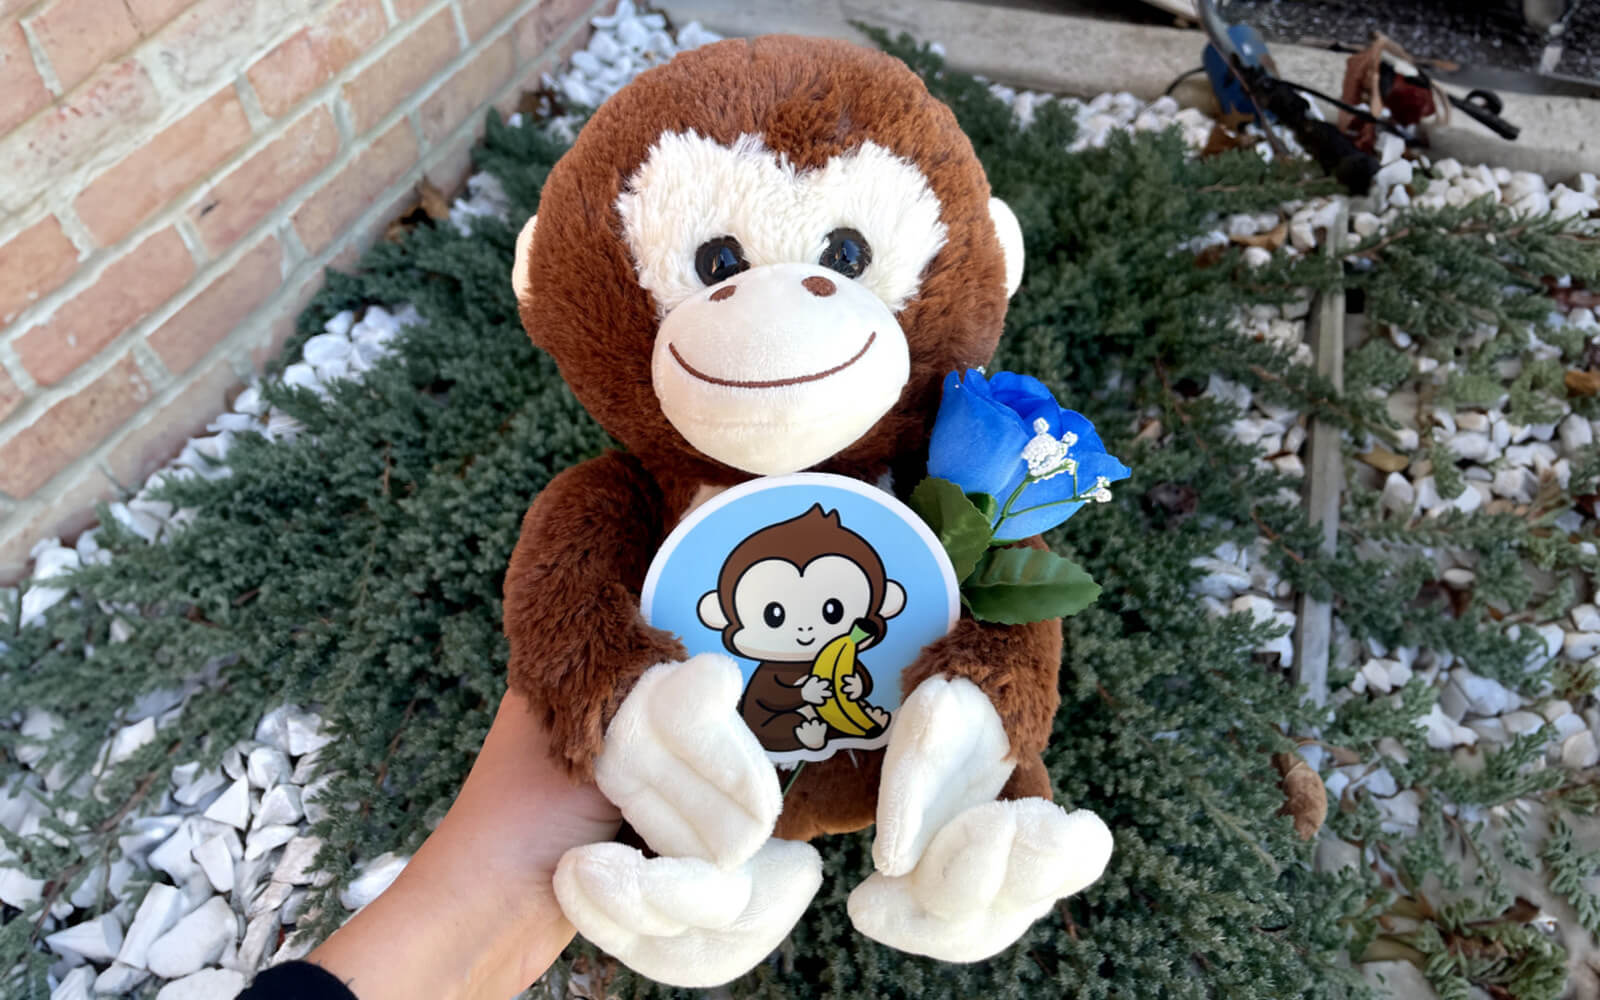 person holding stuffed animal monkey with sticker and rose